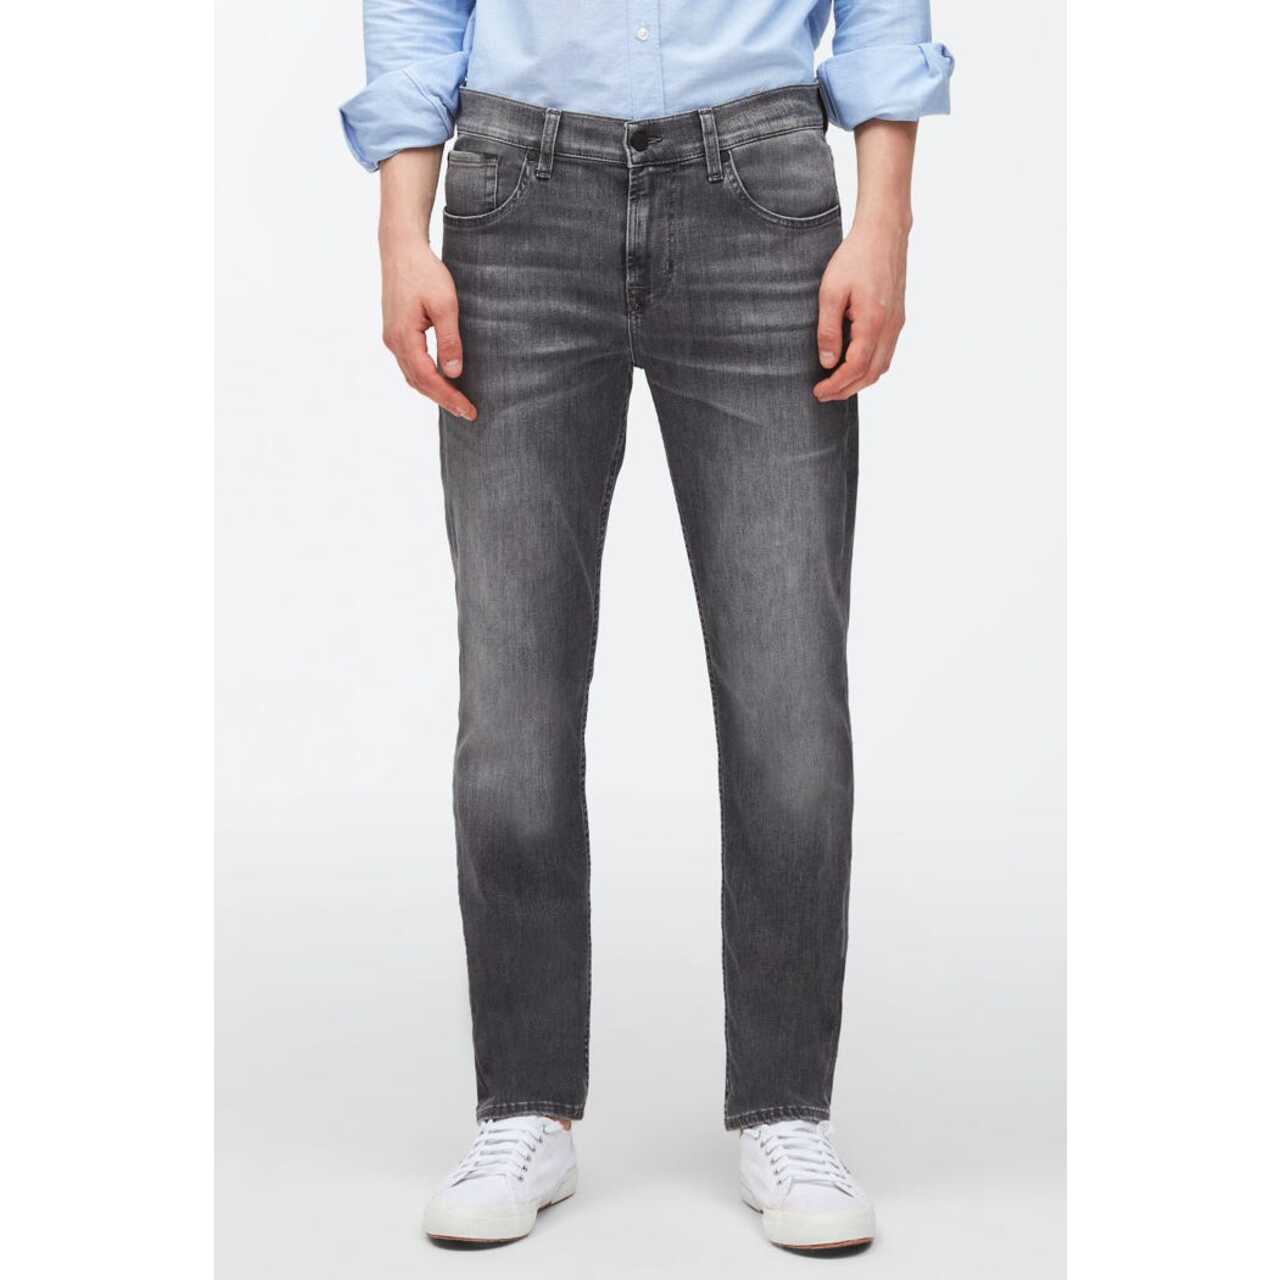 7 FOR ALL MANKIND - JEANS / SLIMMY LUXE PERFOMANCE ECO LIGHT